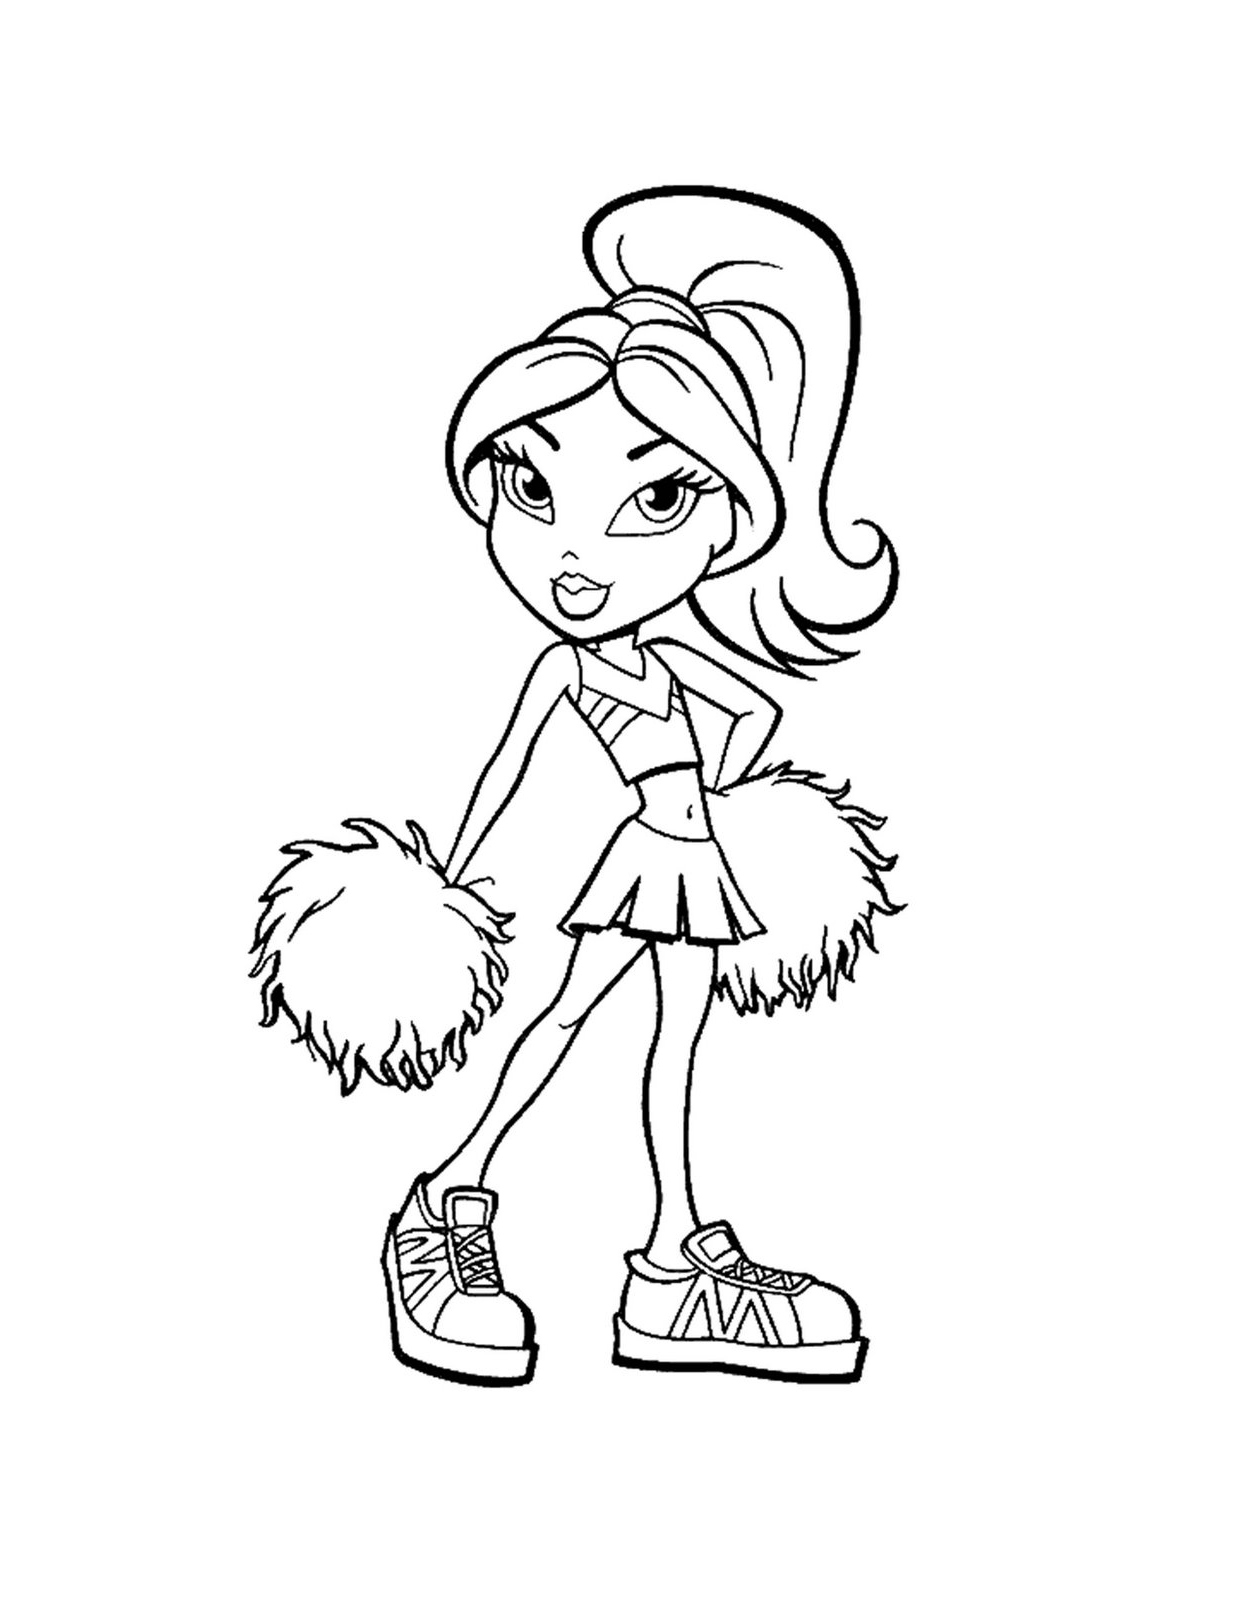 find thousands of disney princess coloring pages to print and color.